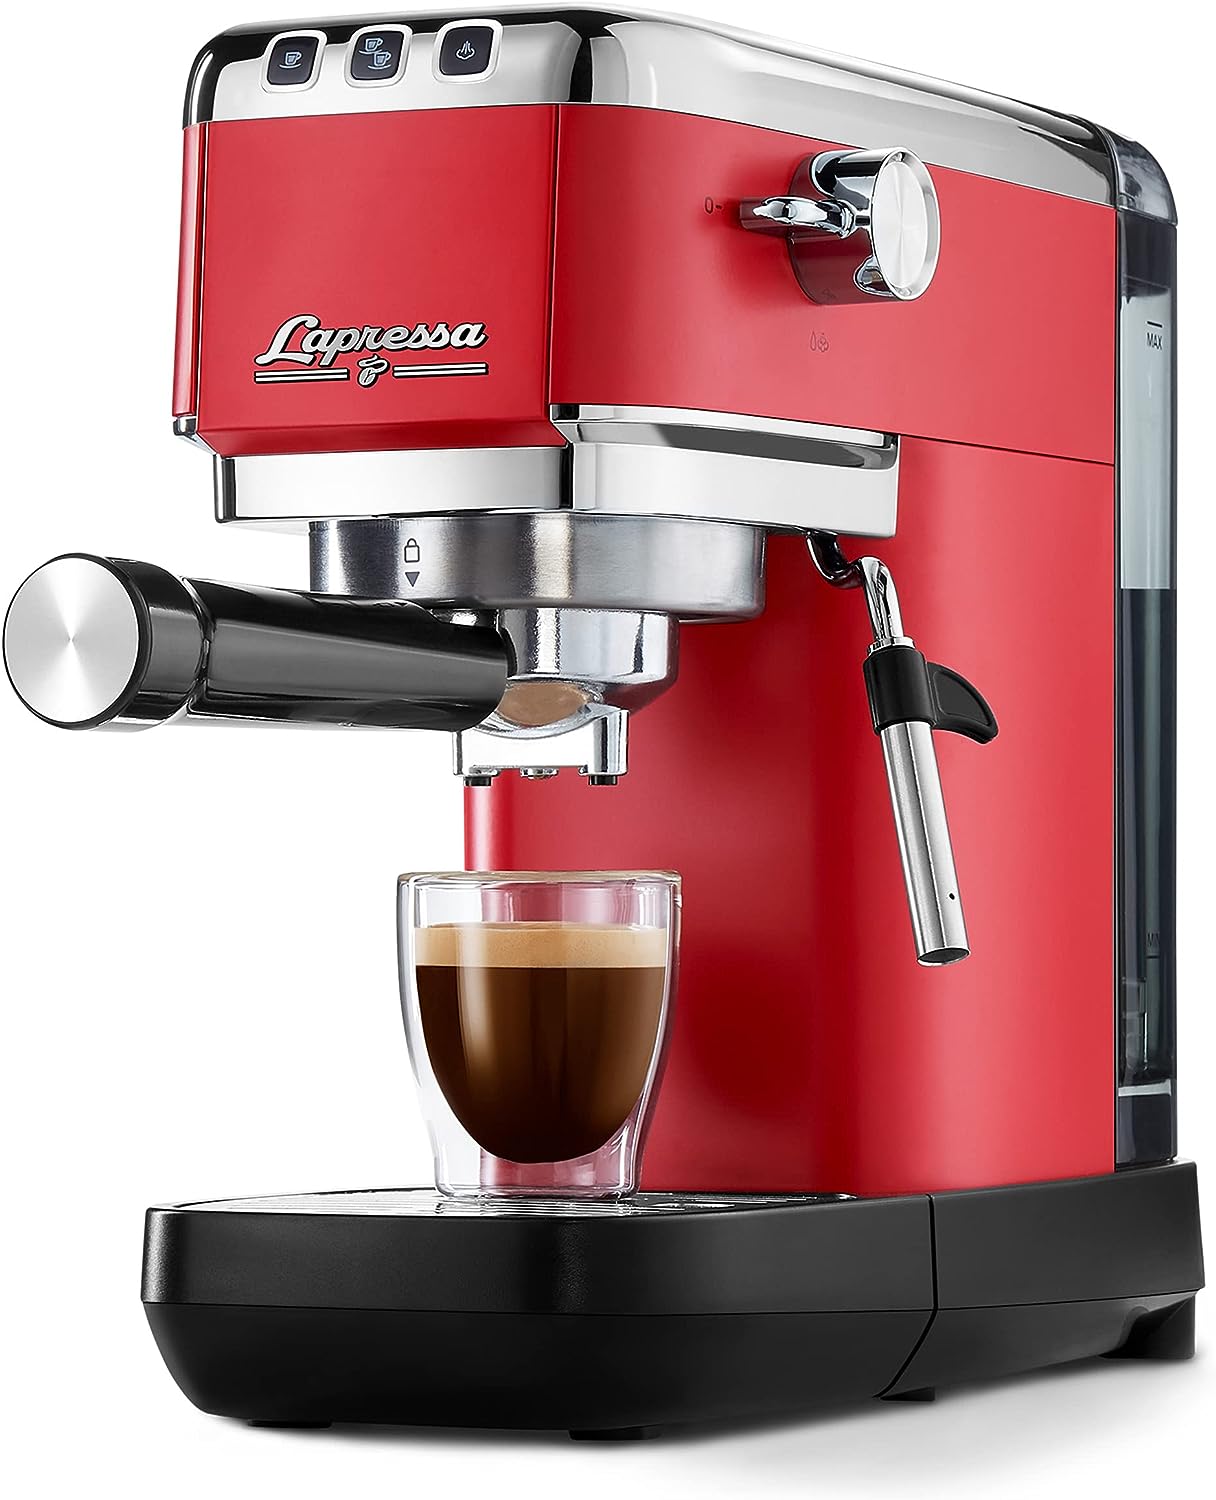 Tchibo Lapressa Portafilter Espresso Machine with Double Spout and Milk Frothing Nozzle (15 Bar, 980 ml Water Tank) Includes Two Double-Walled Sieves for Espresso and Milk Foam Red